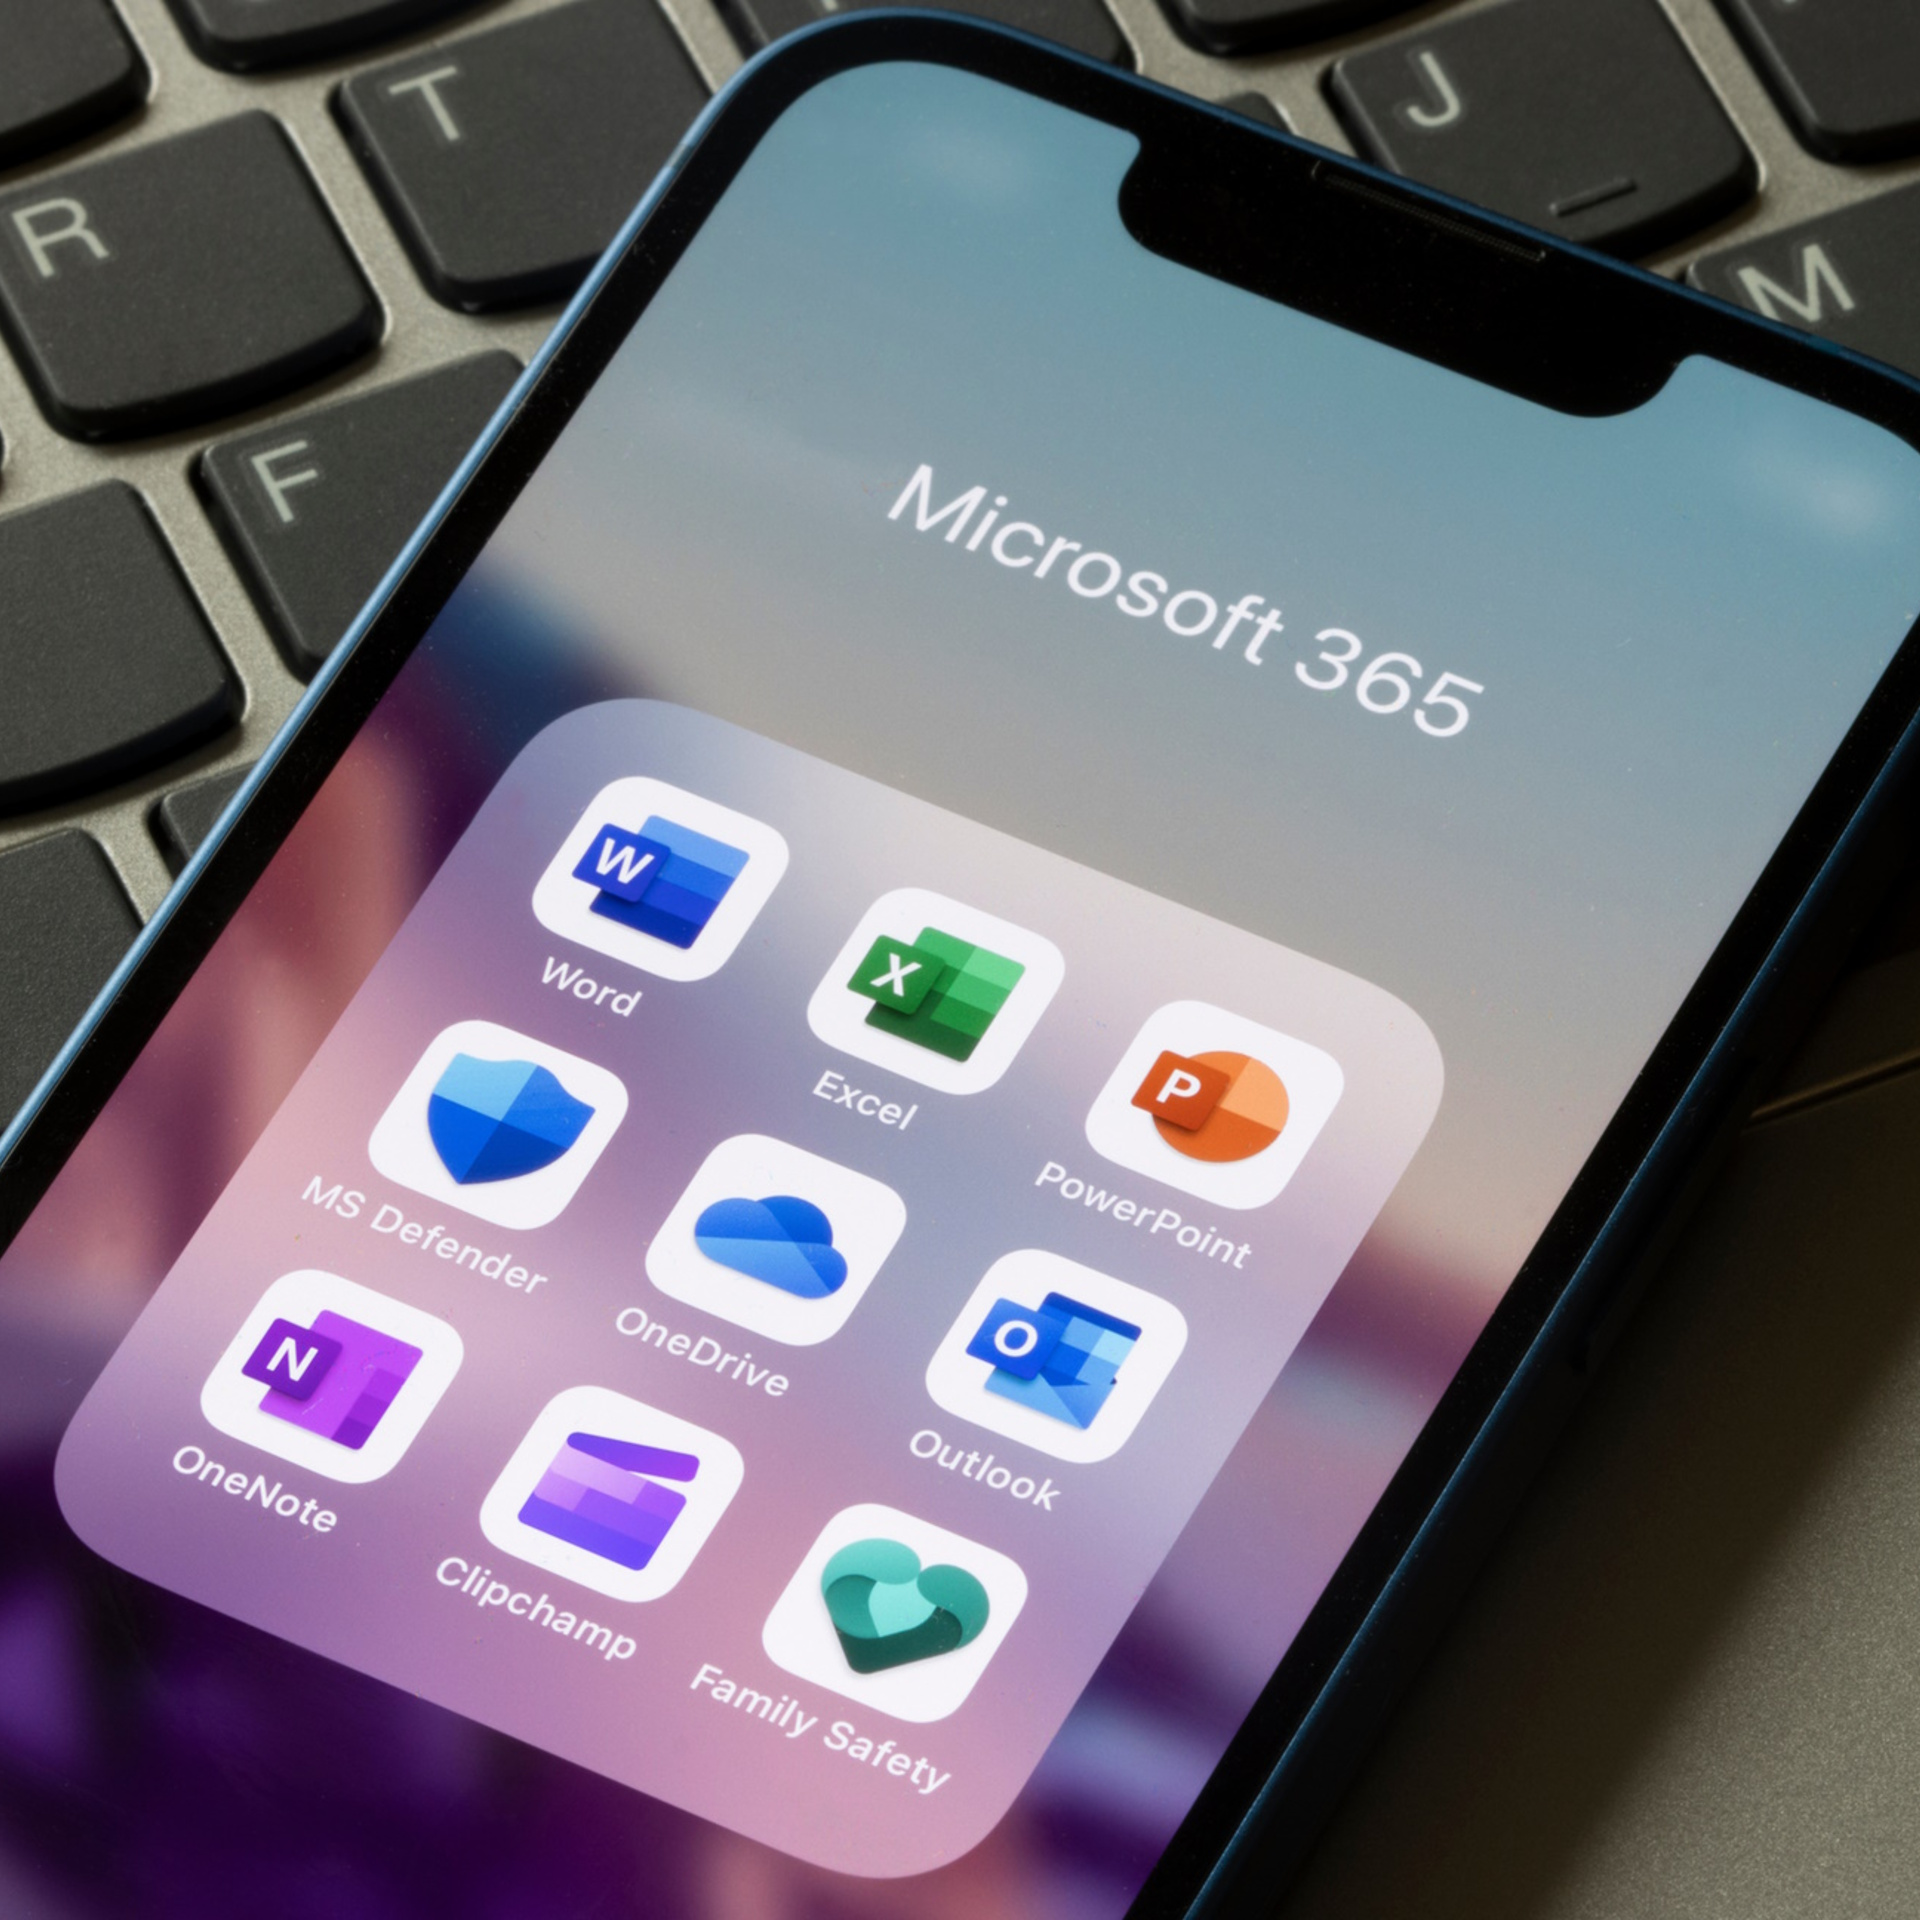 Portland, OR, USA - Dec 7, 2022: Apps included in the Microsoft 365 Family plan are seen on an iPhone - Word, Excel, PowerPoint, Defender, OneDrive, Outlook, OneNote, Clipchamp, and Family Safety.